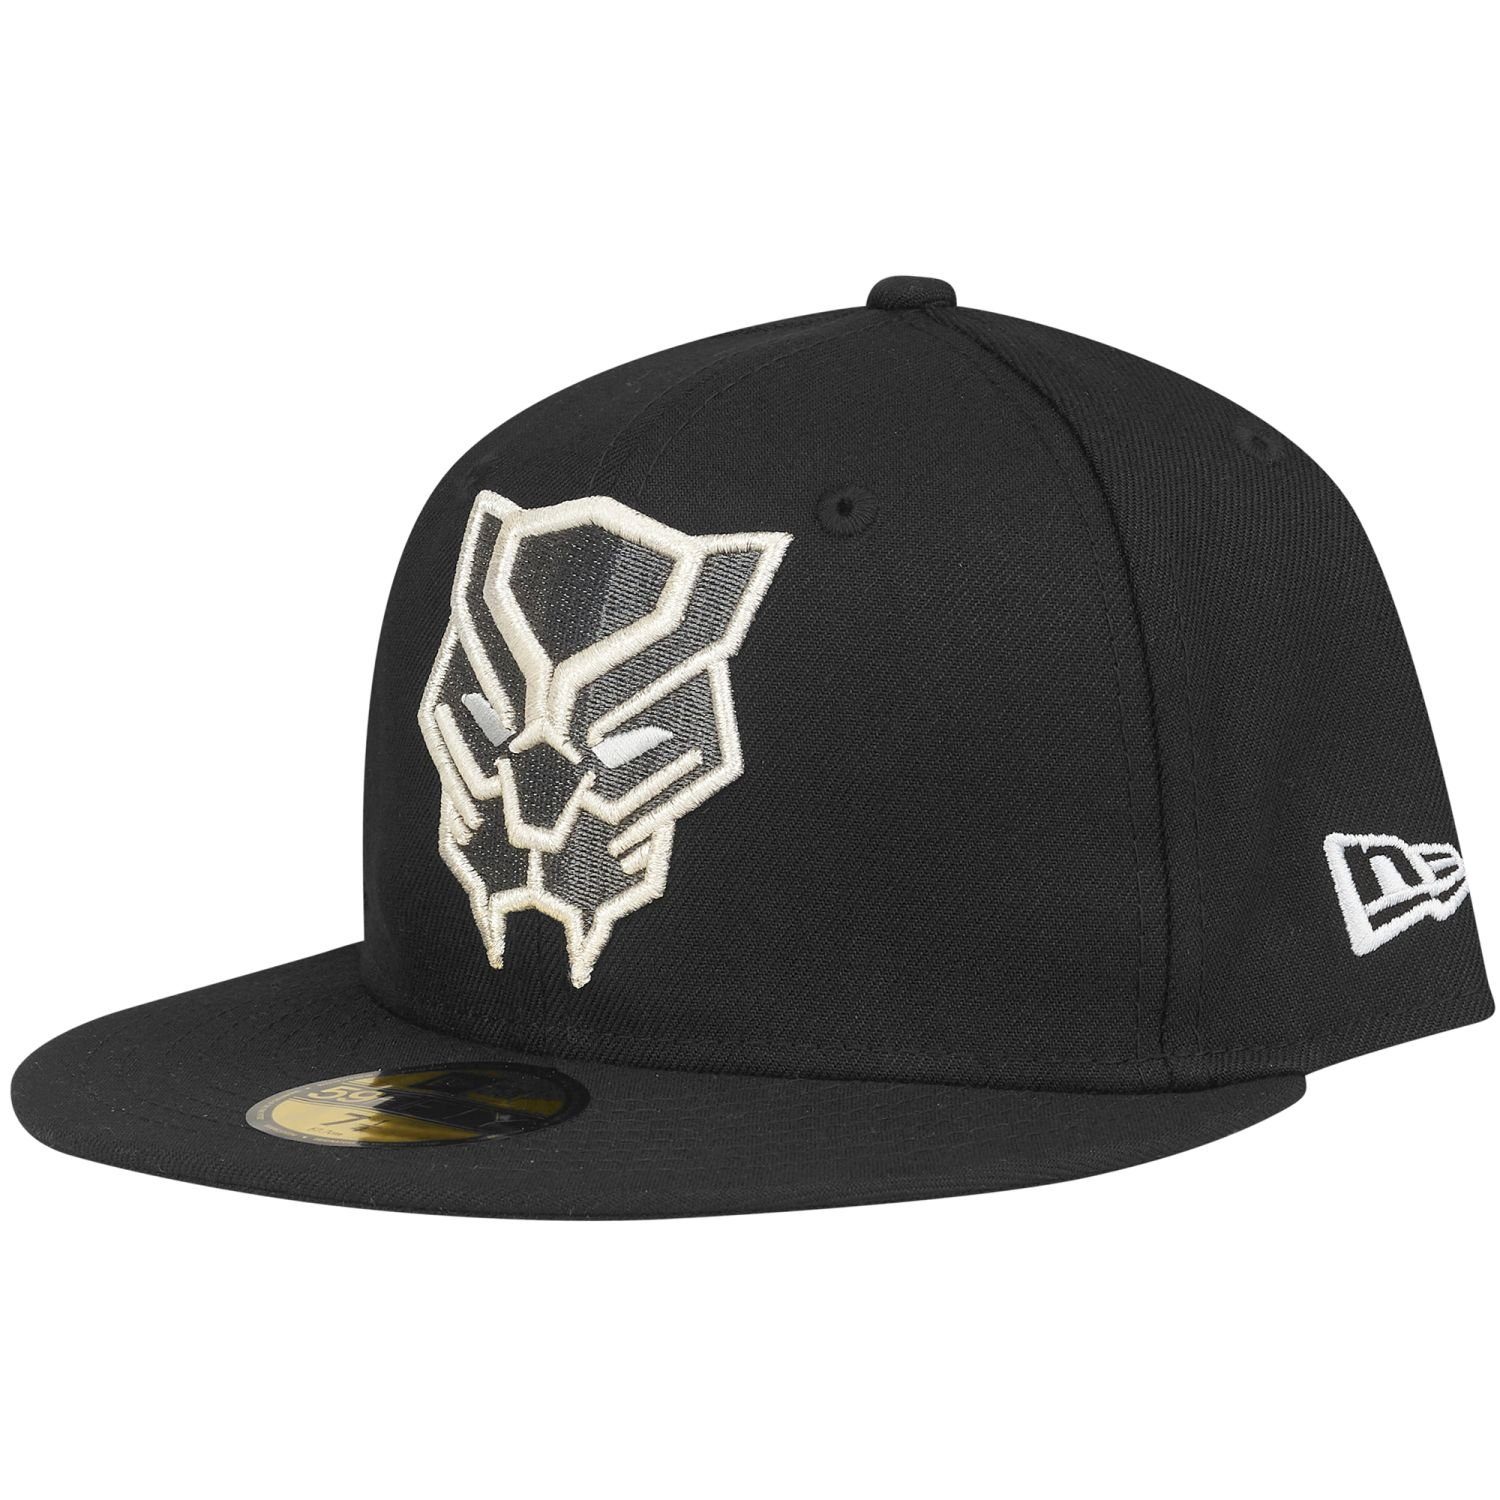 New Era Fitted Cap 59Fifty Panther